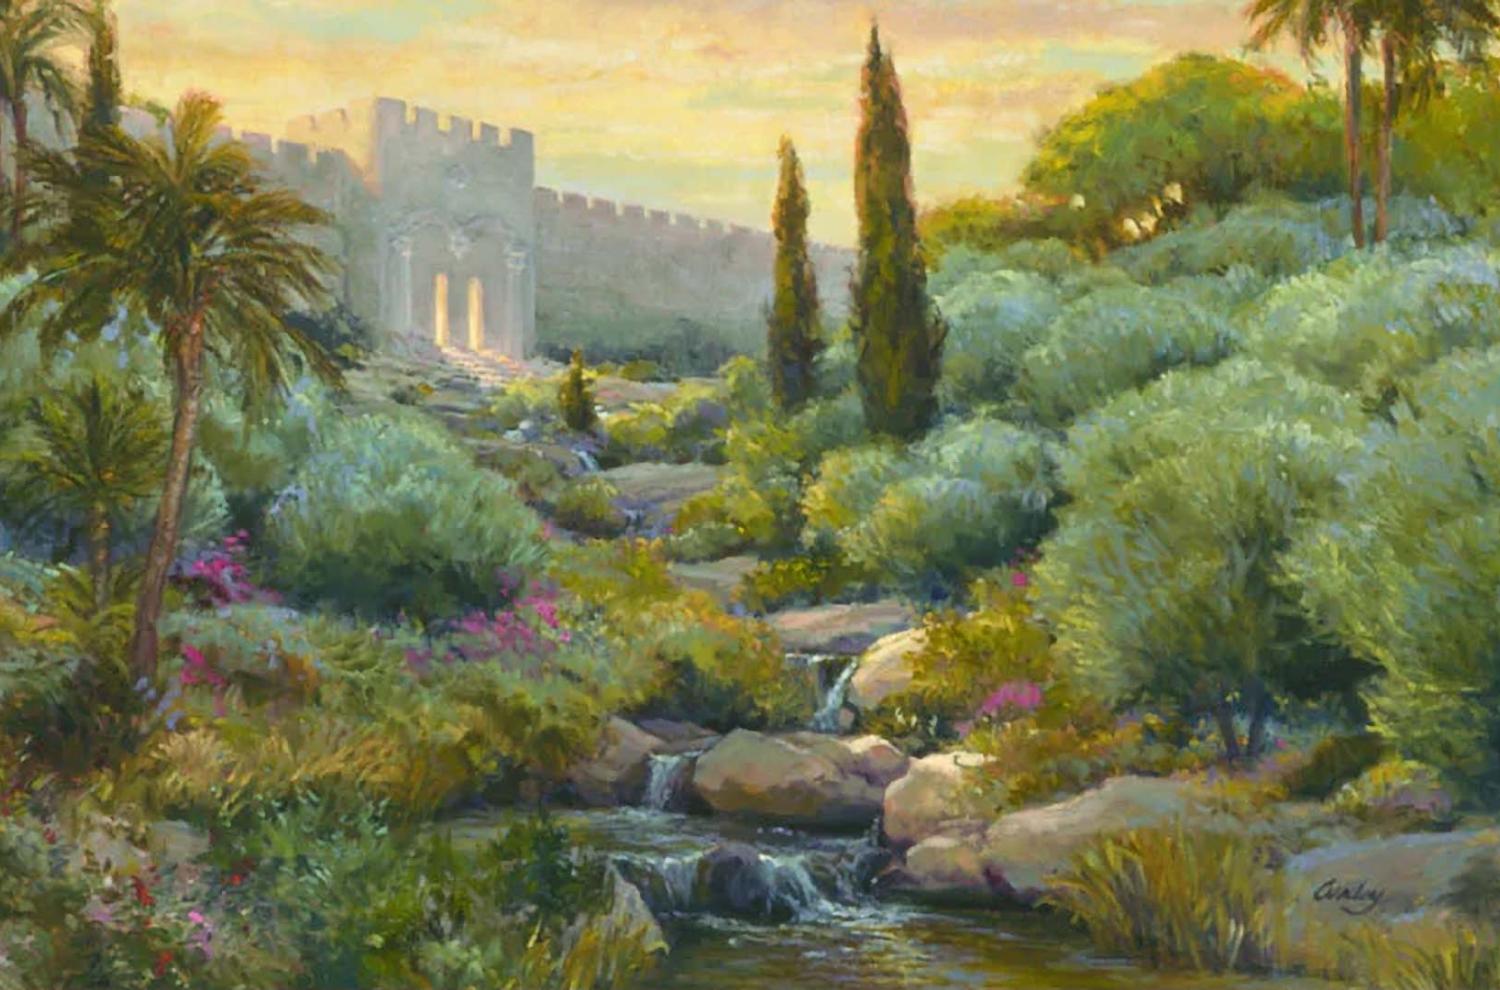 A painting by Linda Curley Christensen of a gate in Jerusalem known as the Beautiful Gate.